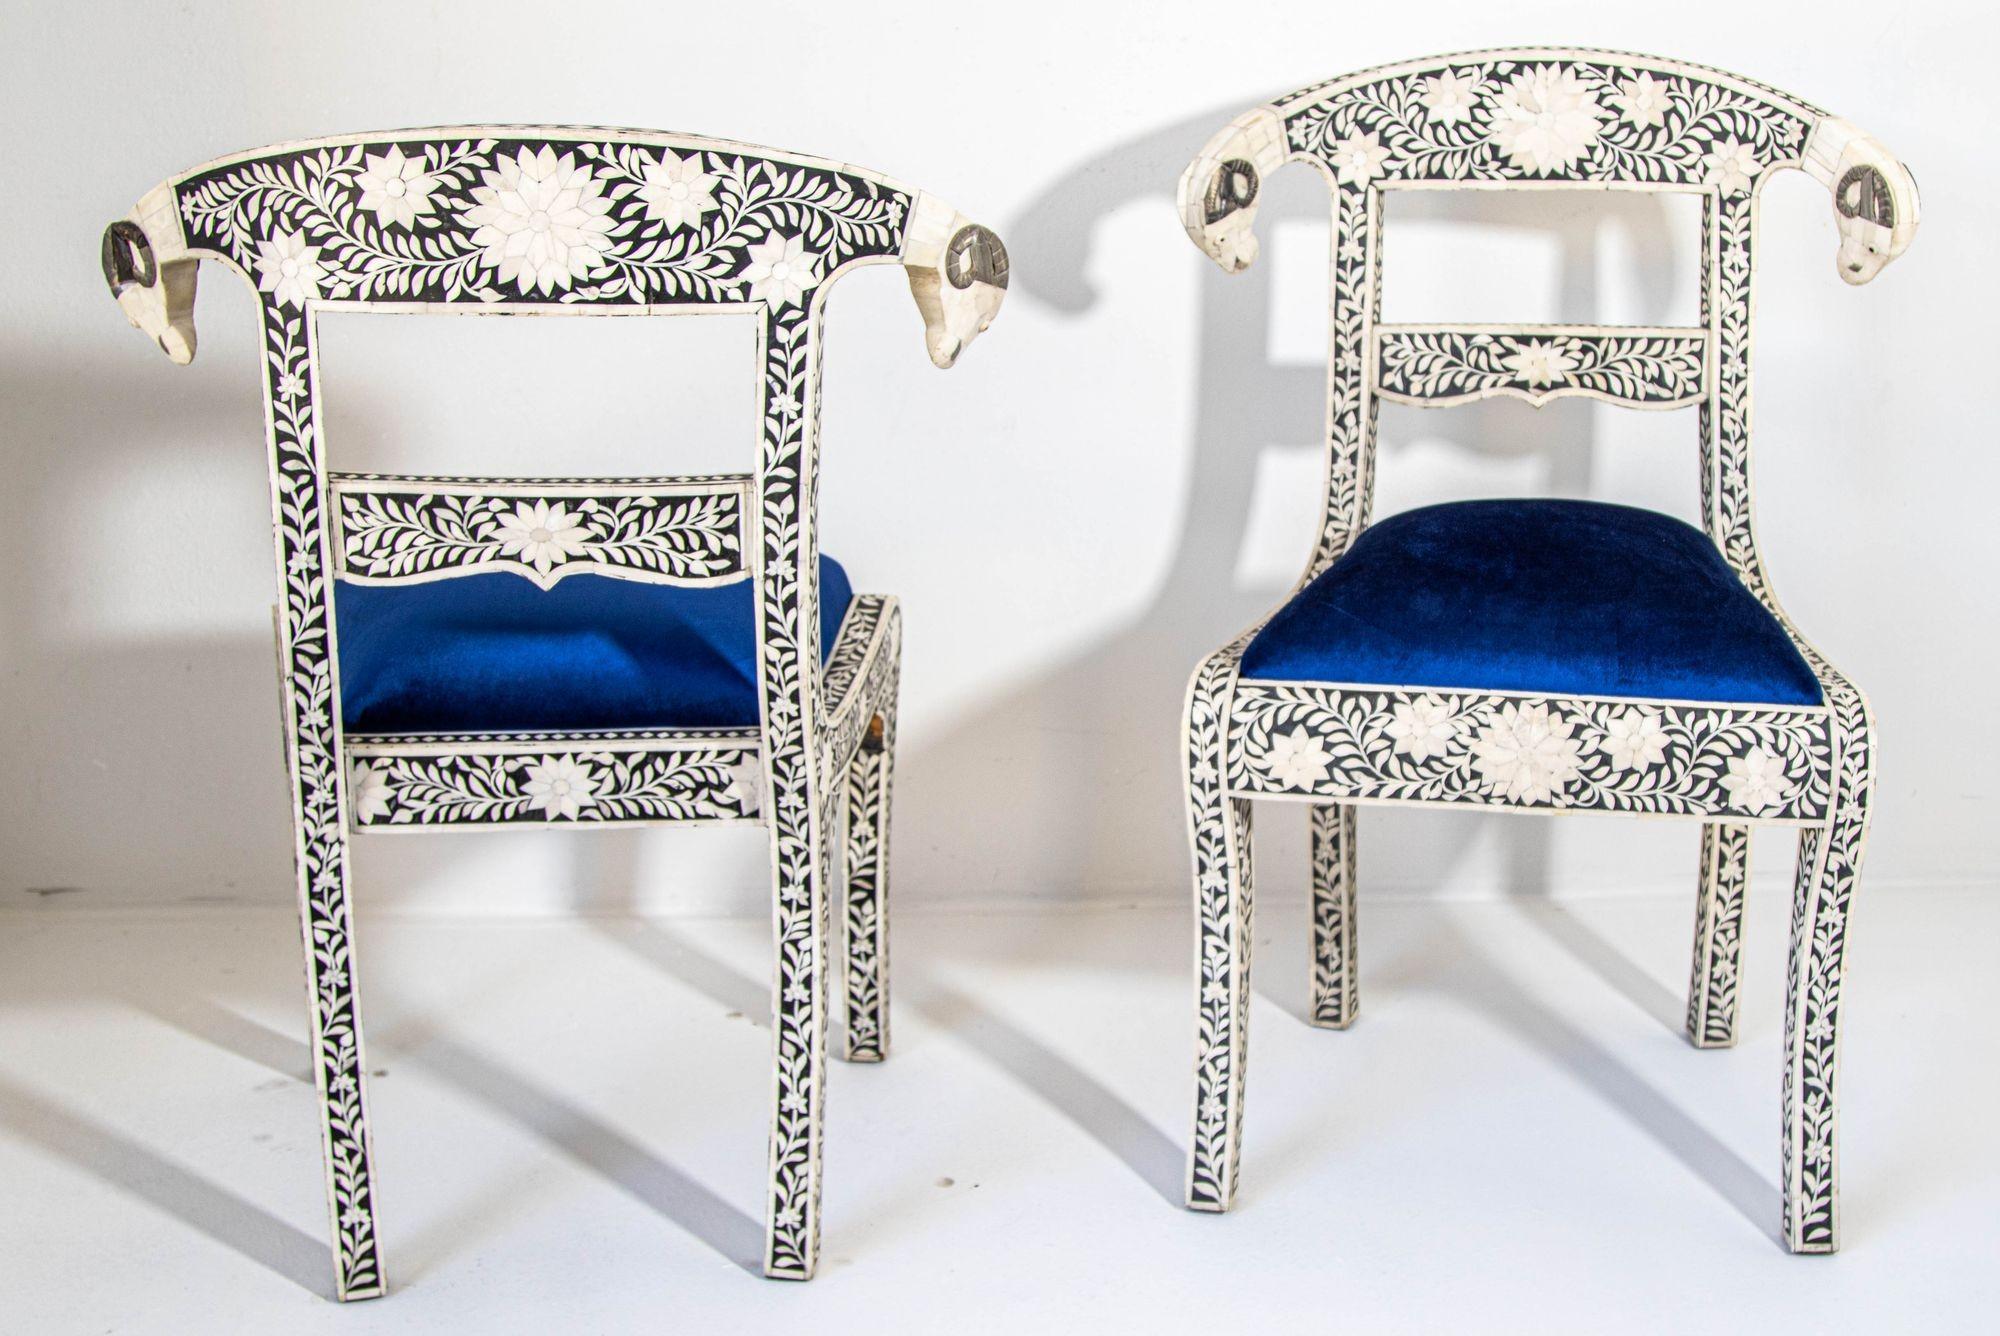 Hand-Carved Antique Anglo-Indian Side Chairs with Ram's Head Bone Inlay Royal Blue Seat Pair For Sale